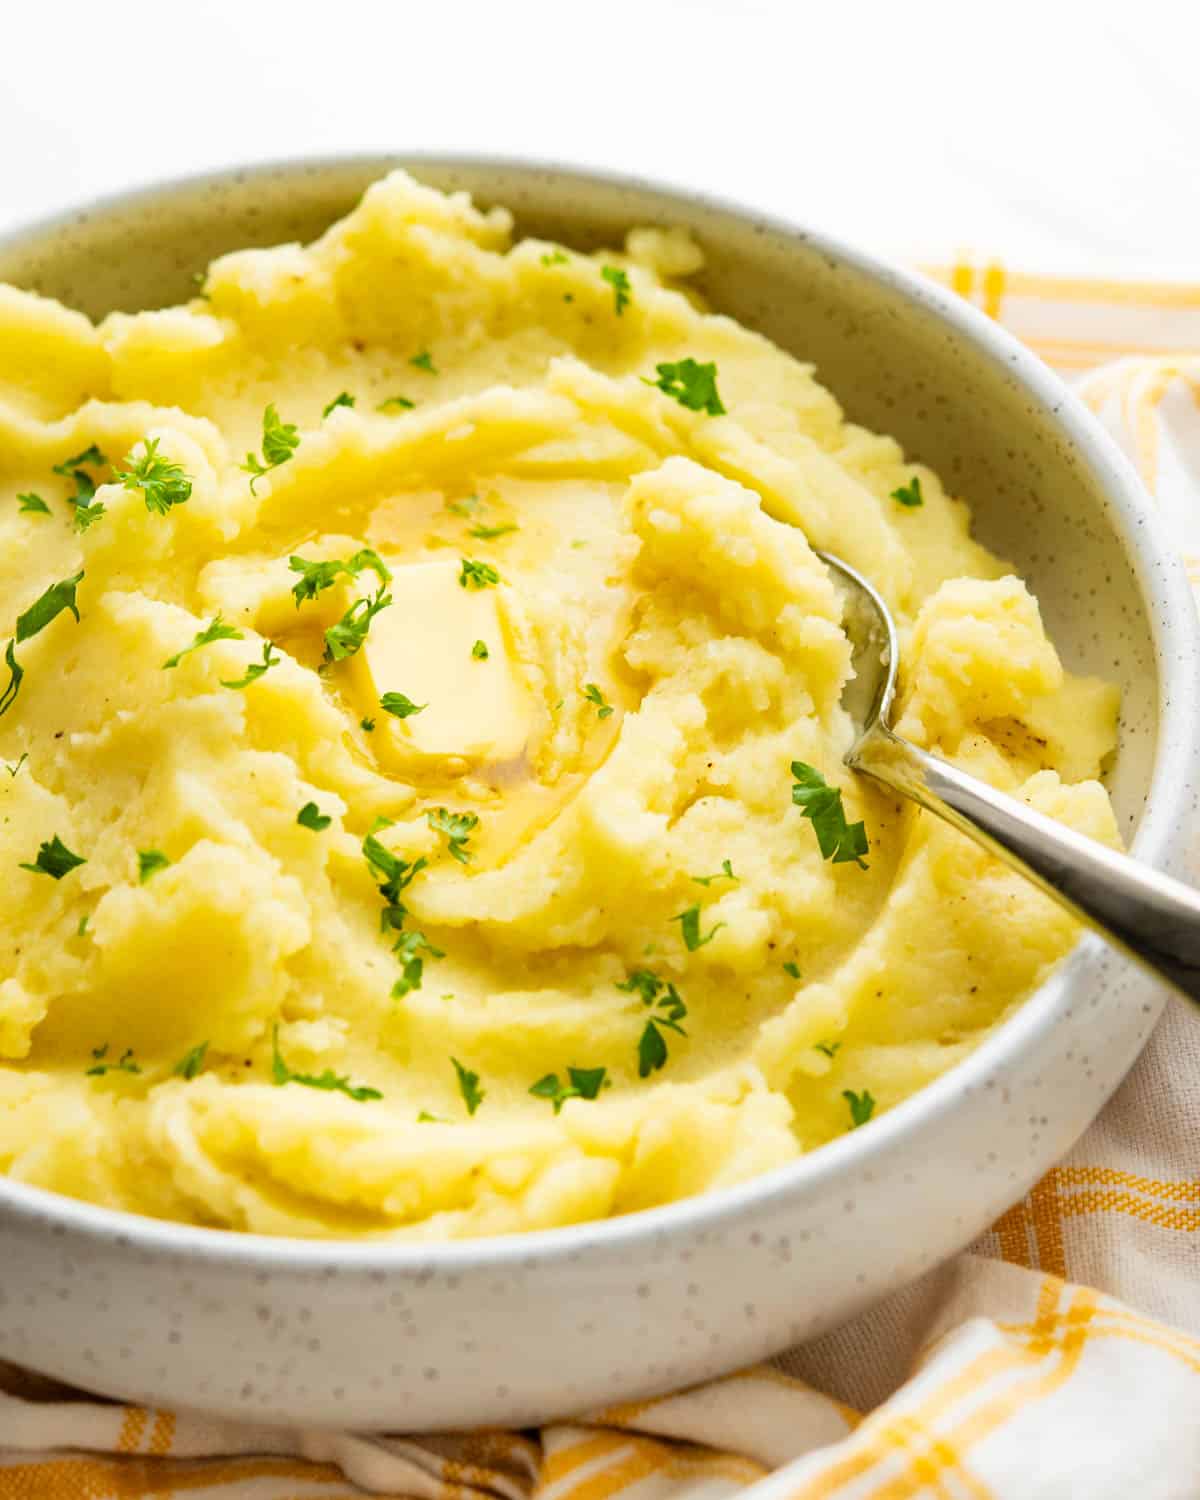 A bowl of creamy riced mashed potatoes with a sprinkle of parsley.